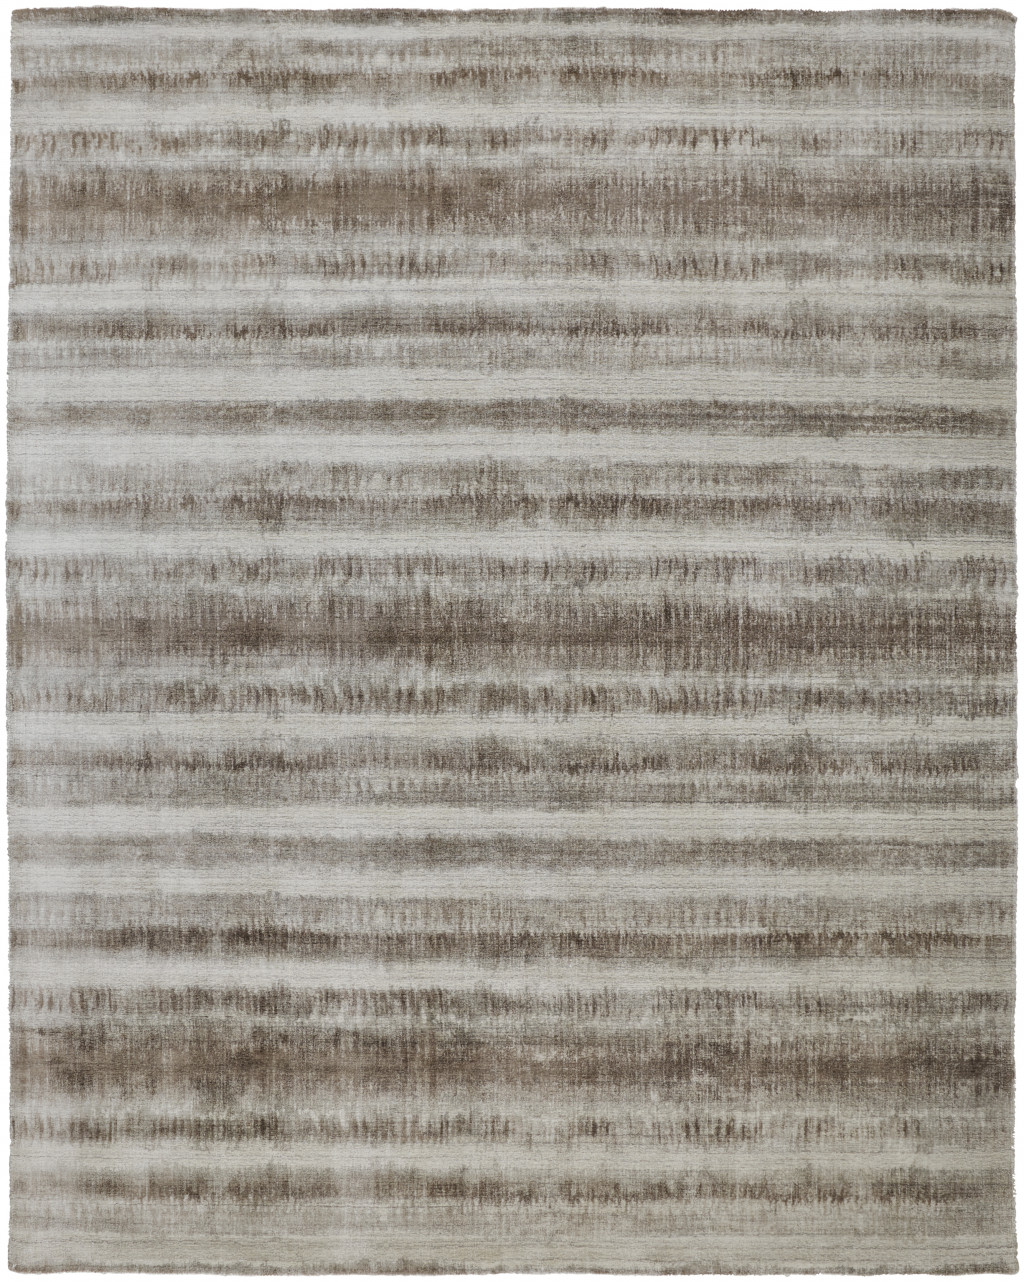 9' X 12' Tan Ivory And Brown Abstract Hand Woven Area Rug-514438-1